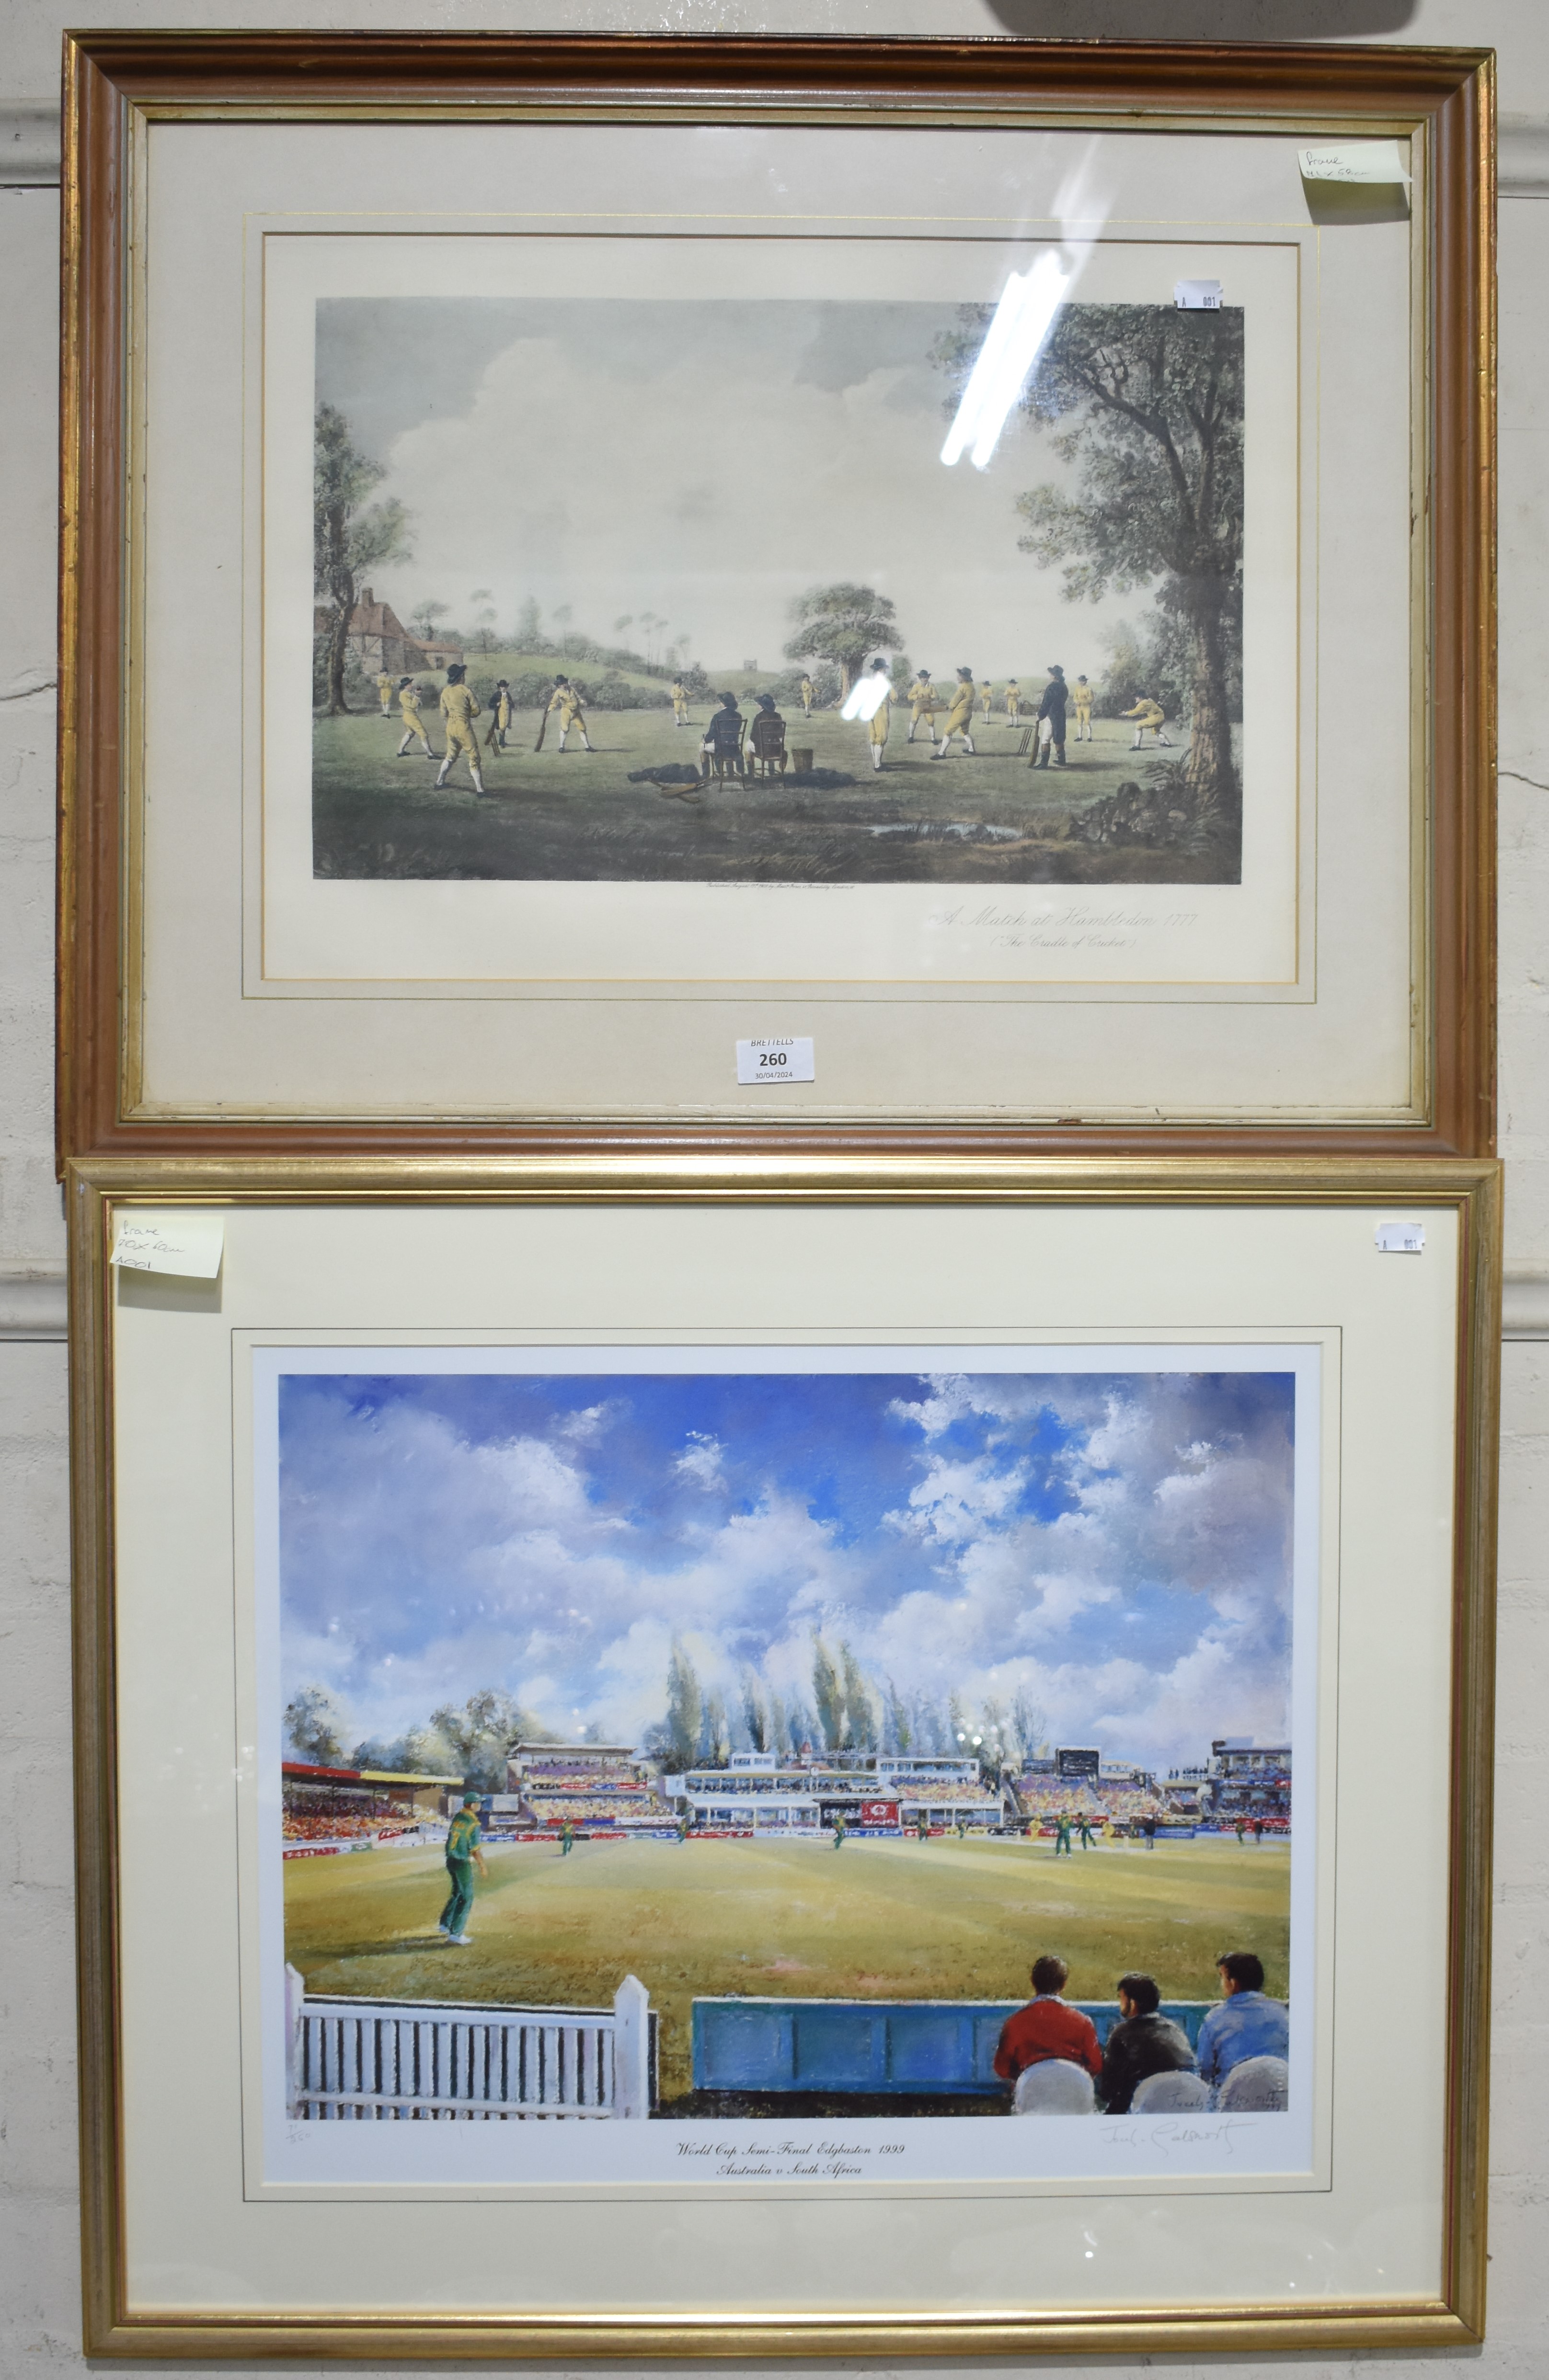 A Framed Cricketing Print together with a Further Cricketing Print, World Cup Semi-Final 1999,